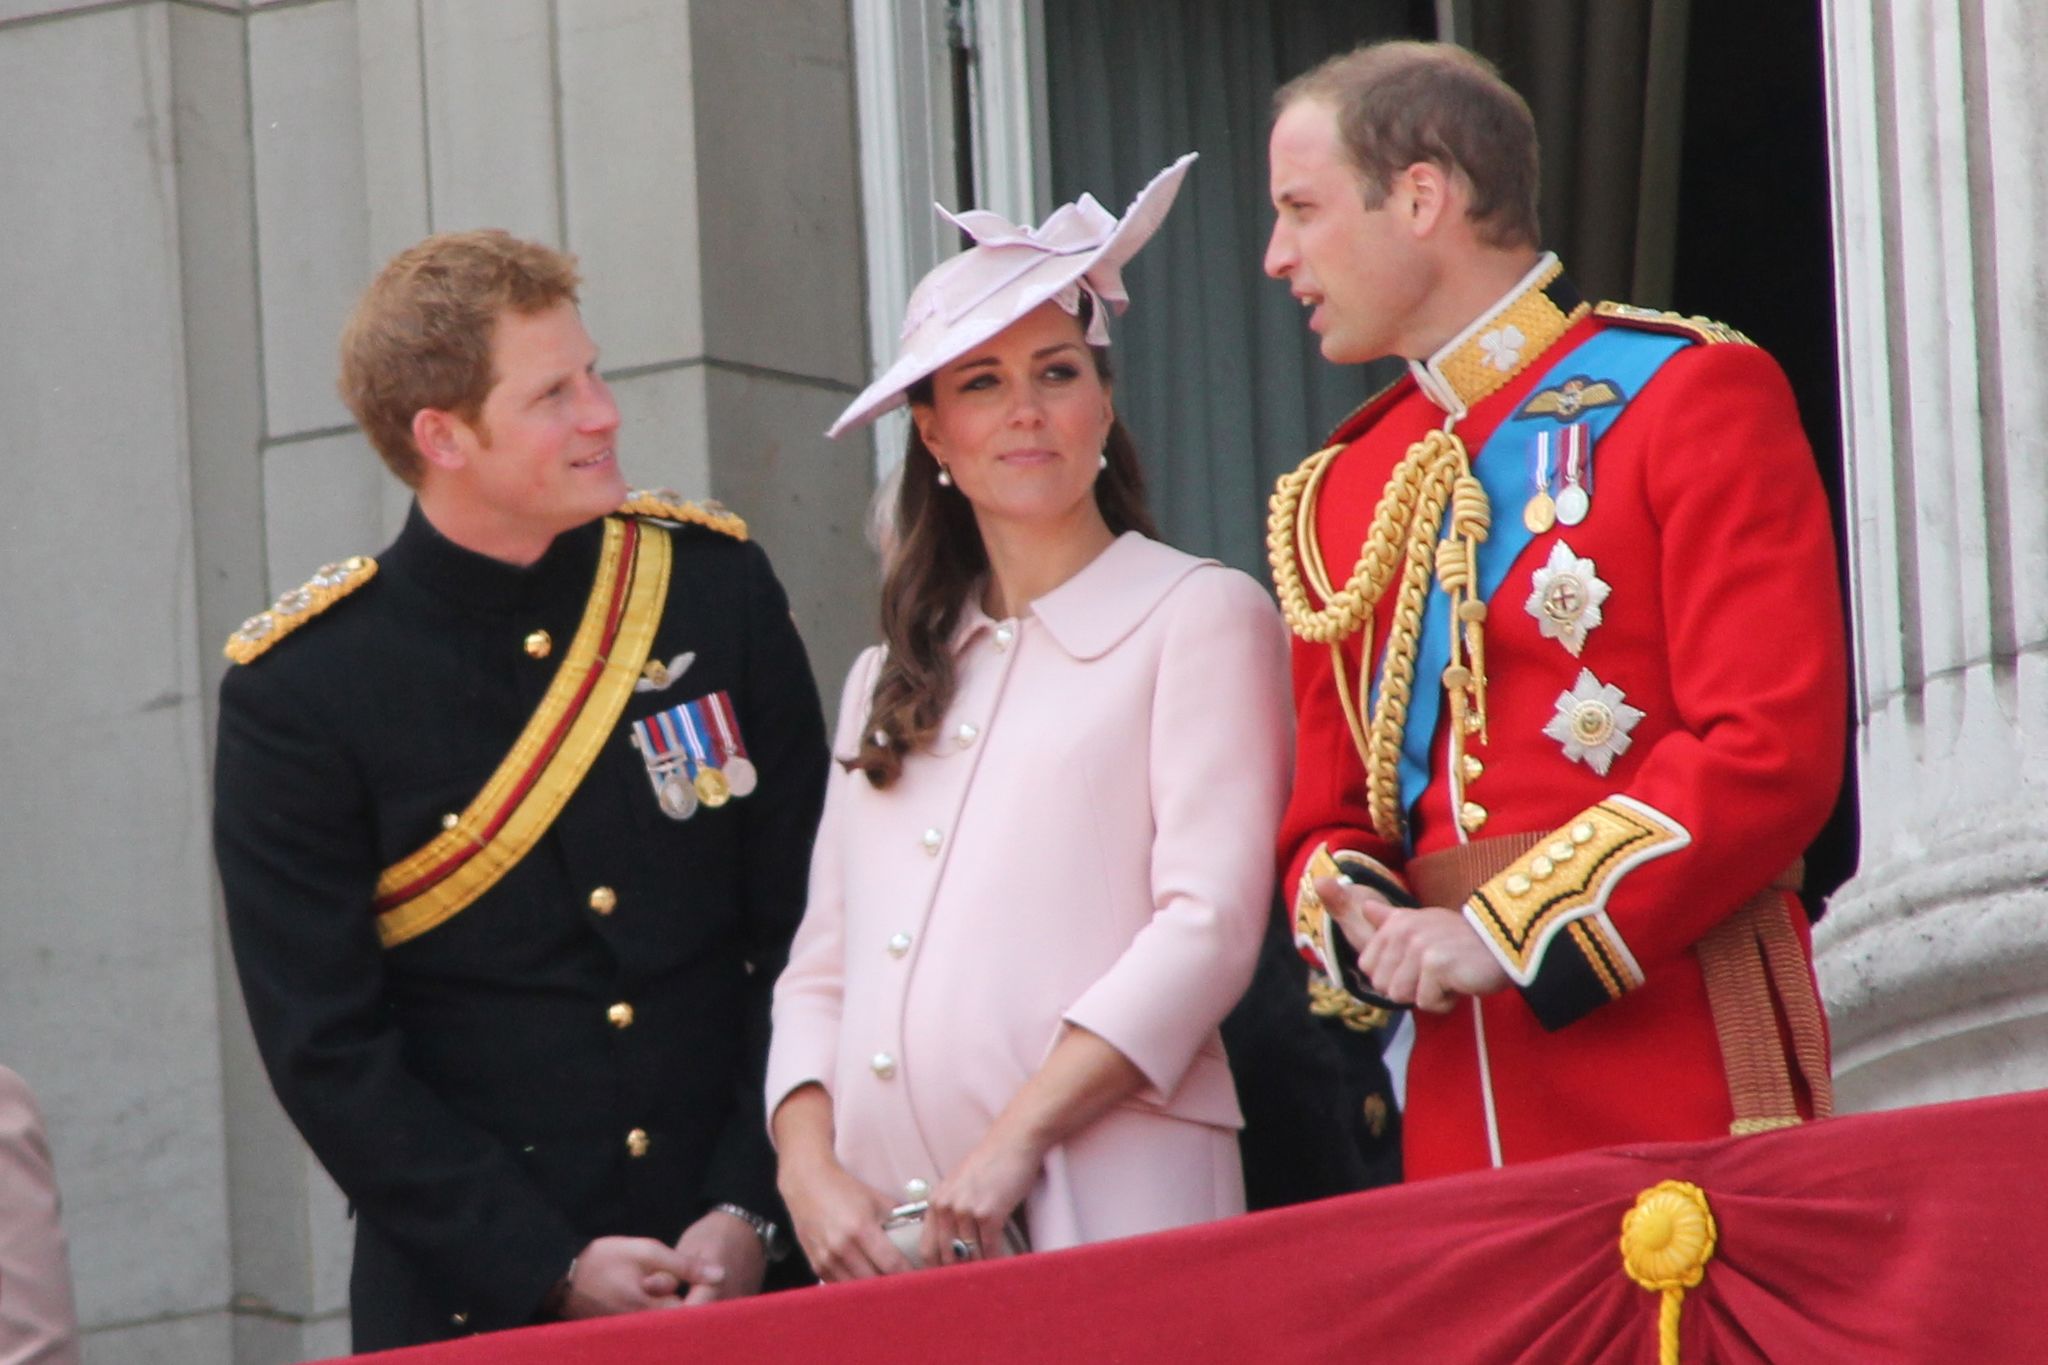 Duke and Duchess of Cambridge and Prince Harry | Source: Wikimedia Commons